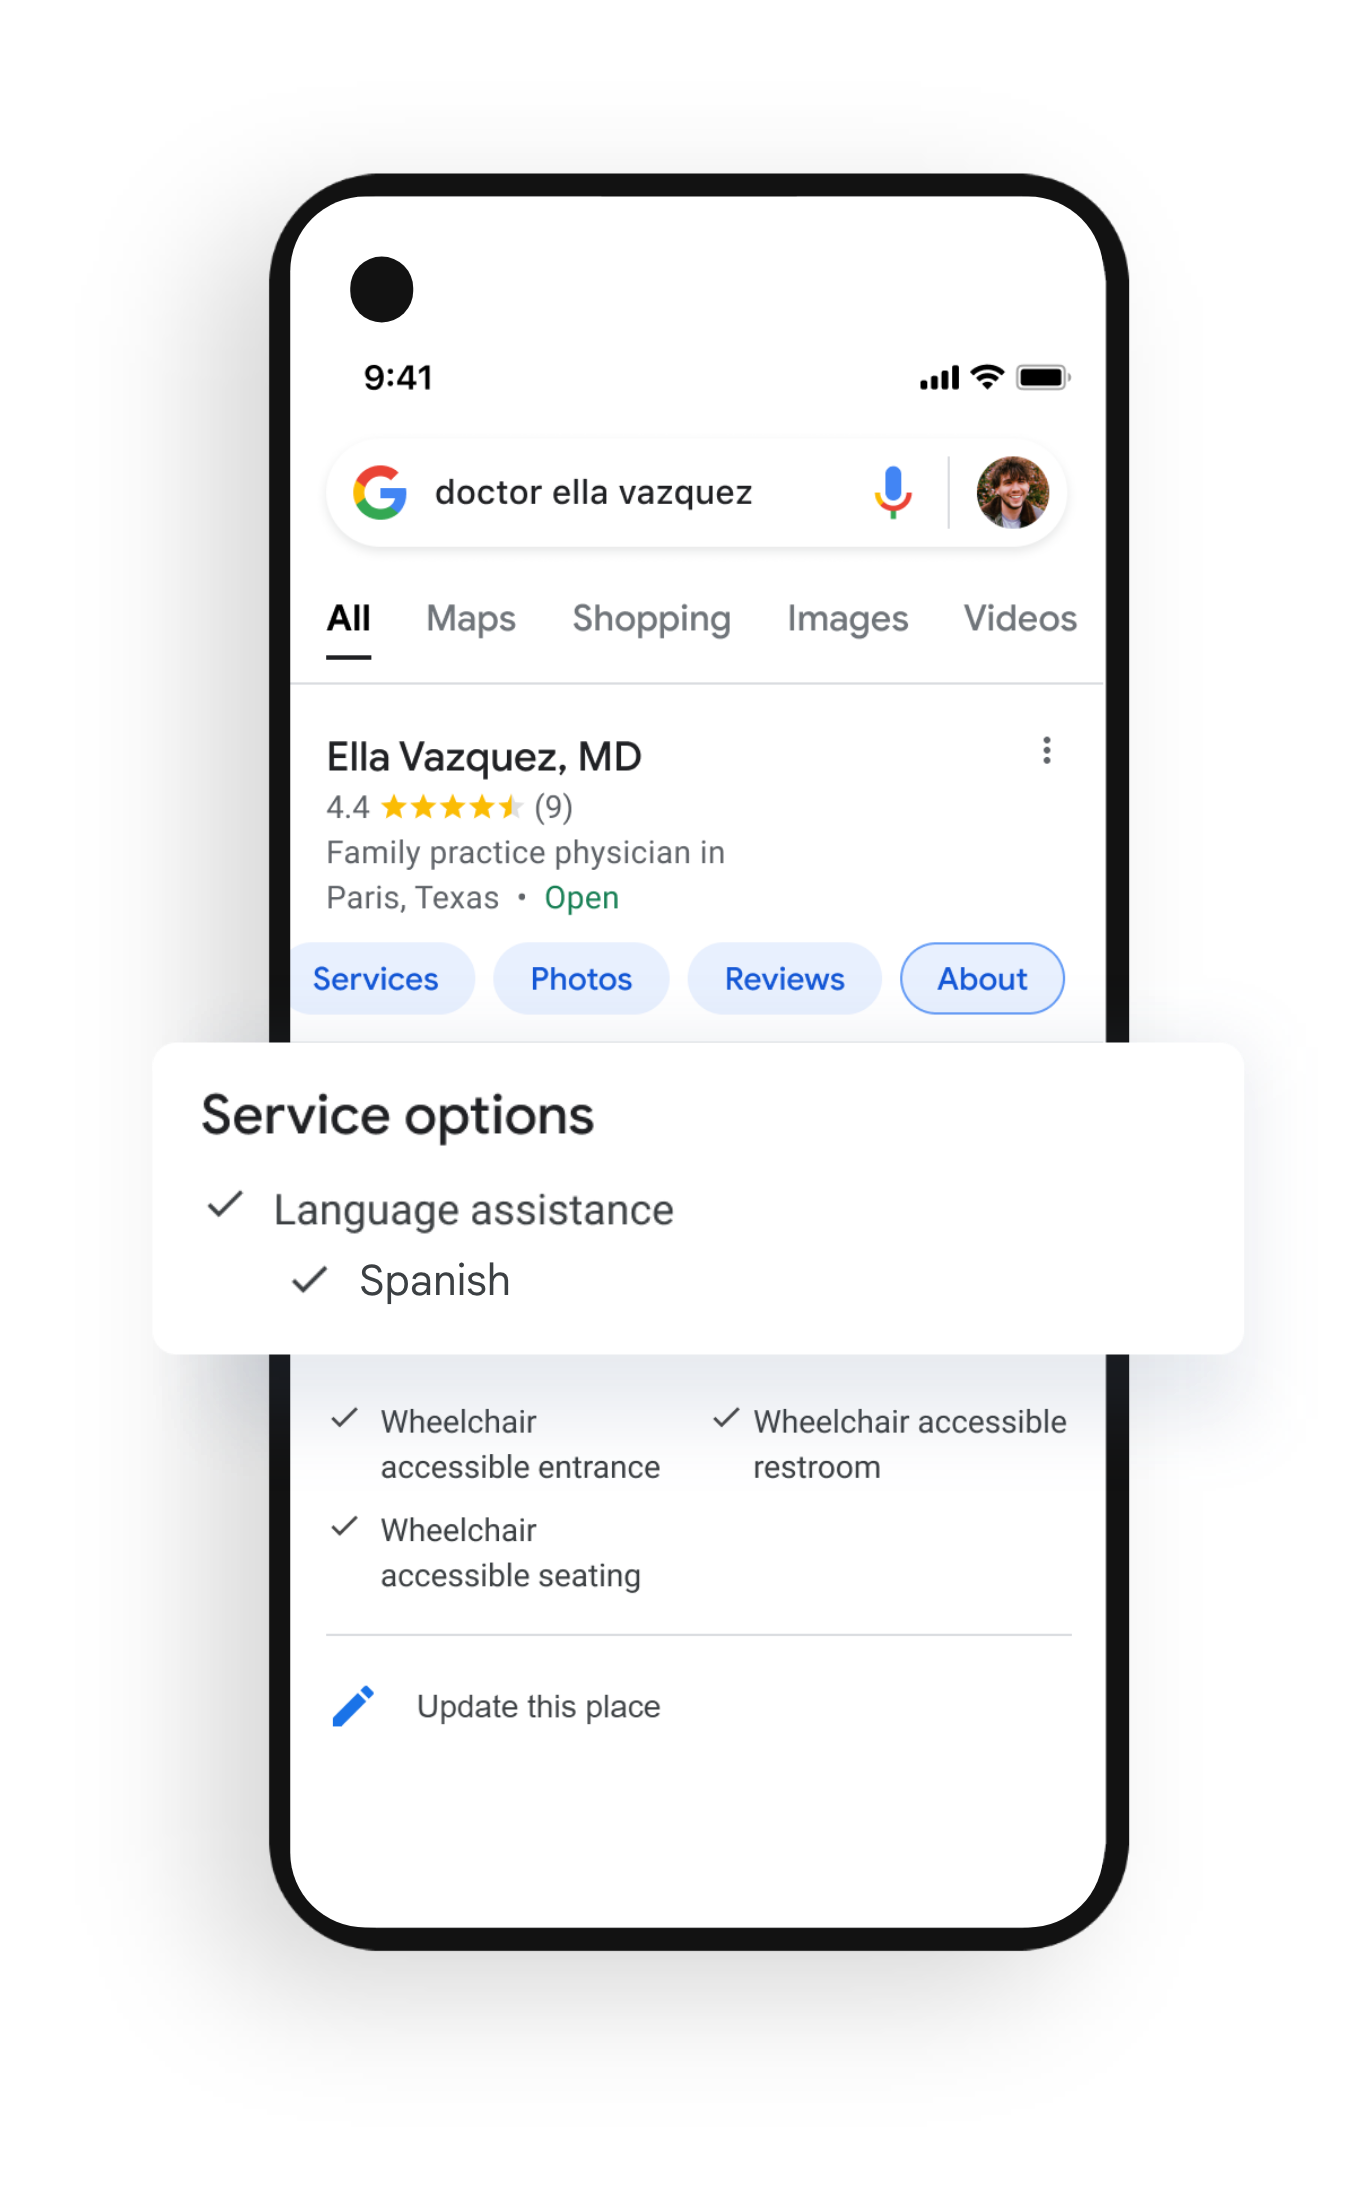 A screenshot of a doctor's Google listing showing that they offer services in Spanish.